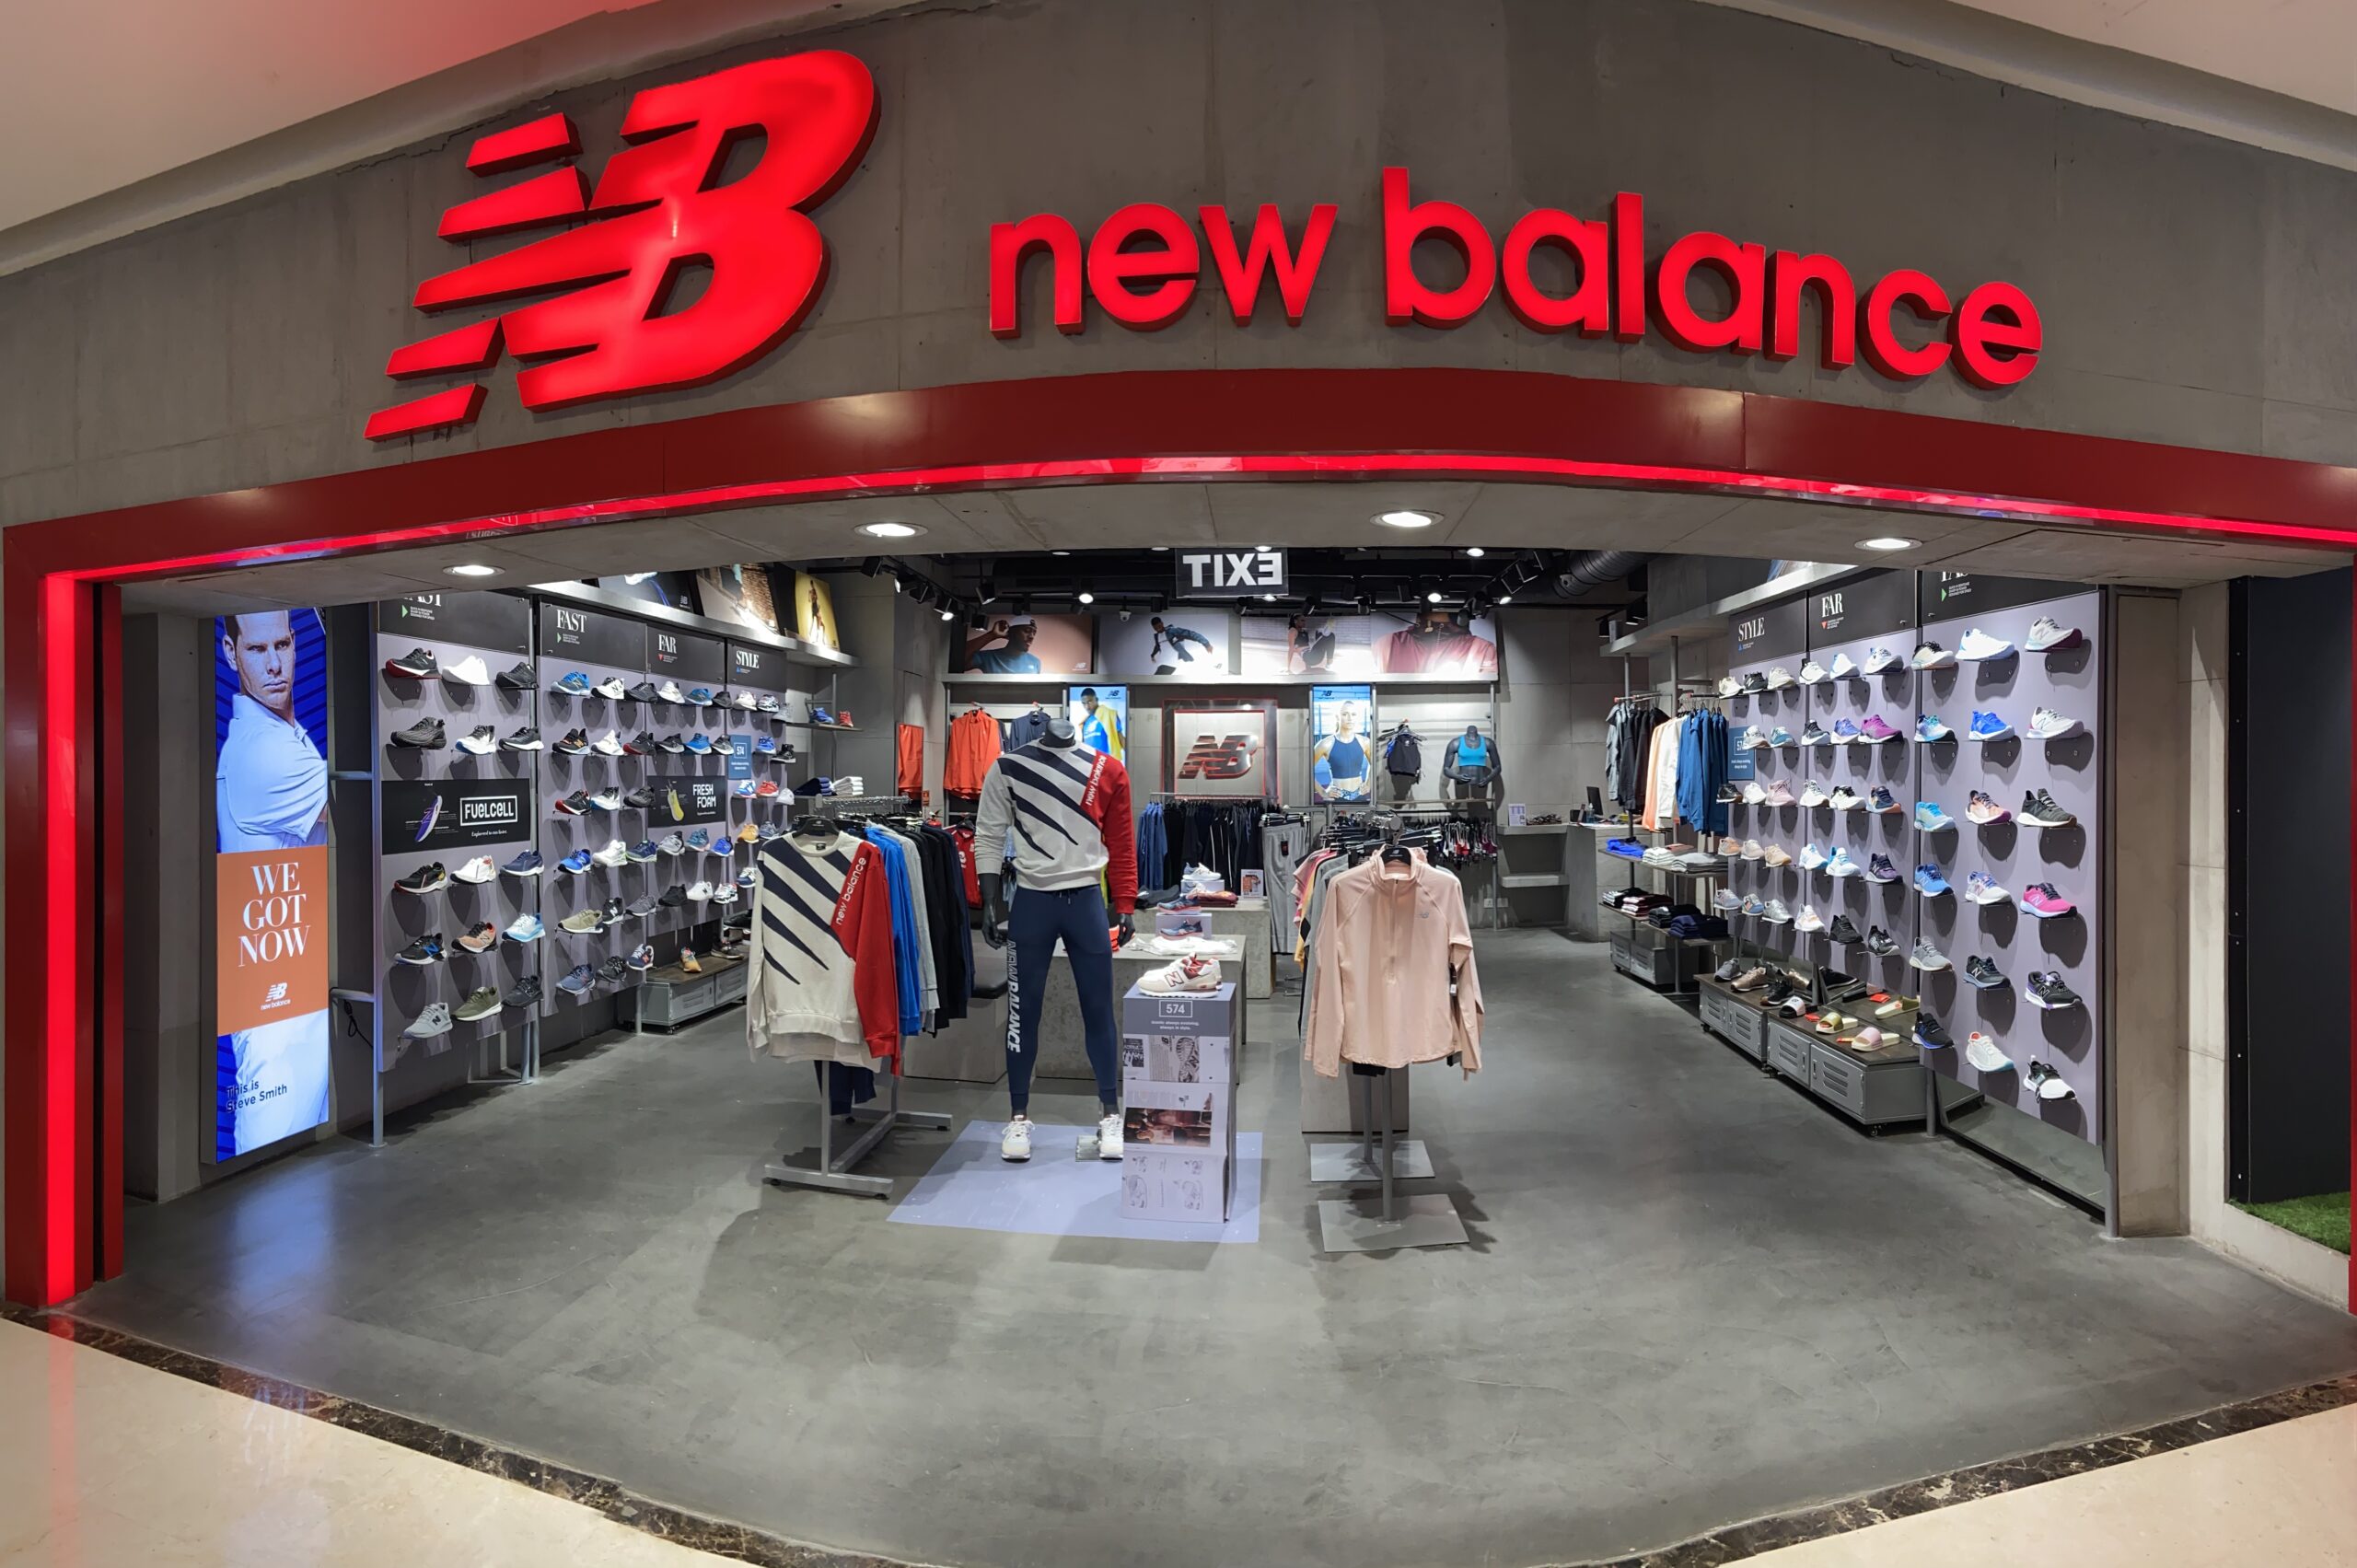 achter bleek regering New Balance eyes Growth in India | Shoes & Accessories